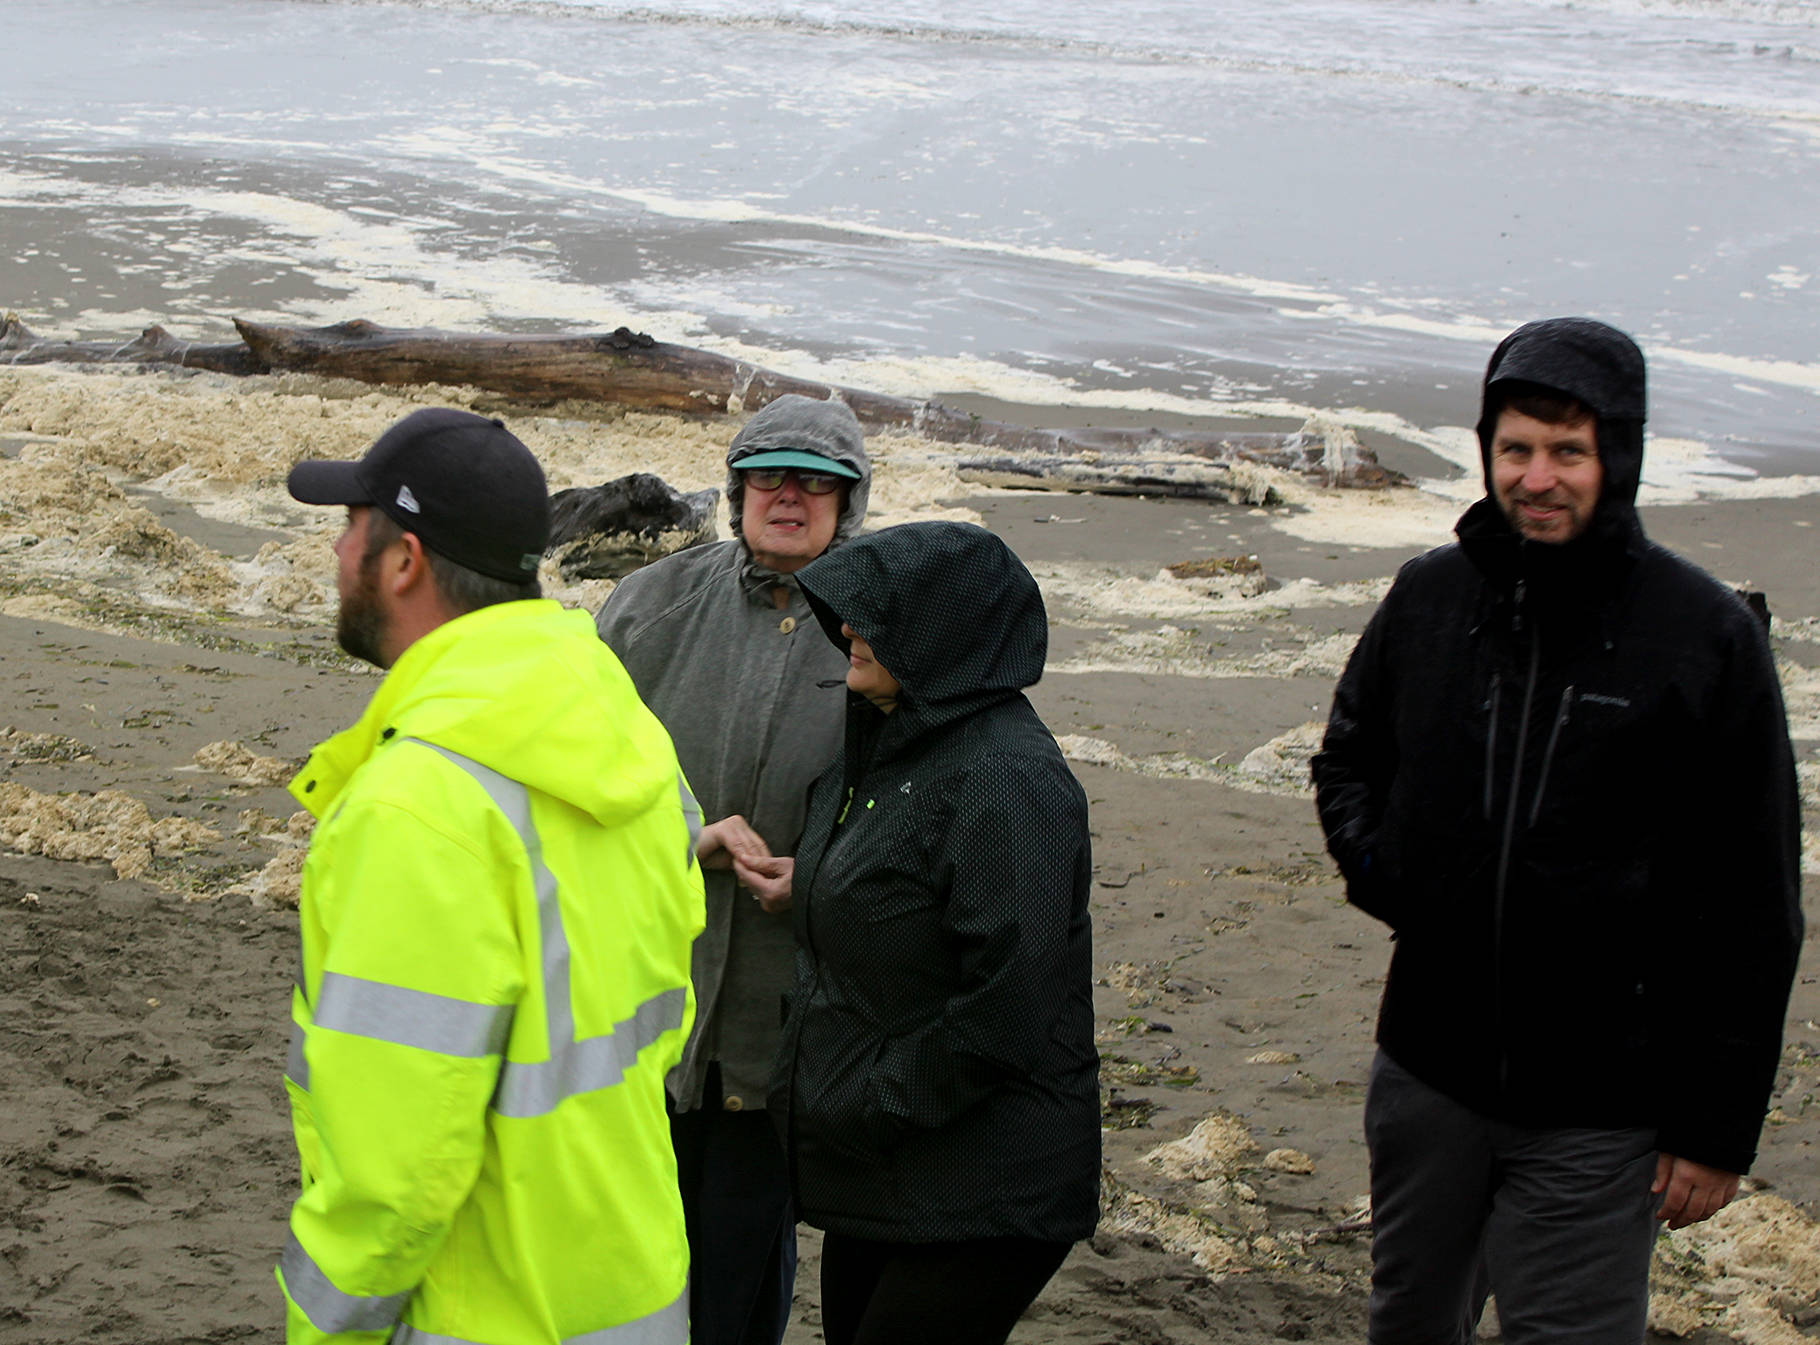 Angelo Bruscas/North Coast News Ocean Shores Public Works Director Nick Bird, left, and Mayor Crystal Dingler, center, give a tour of the areas of the city hit hard by coastal erosion, such as Damon Point, as part of the Coastal Marine Resources Committee Summit, including Surfrider’s Casey Dennehy, far right, last Thursday.